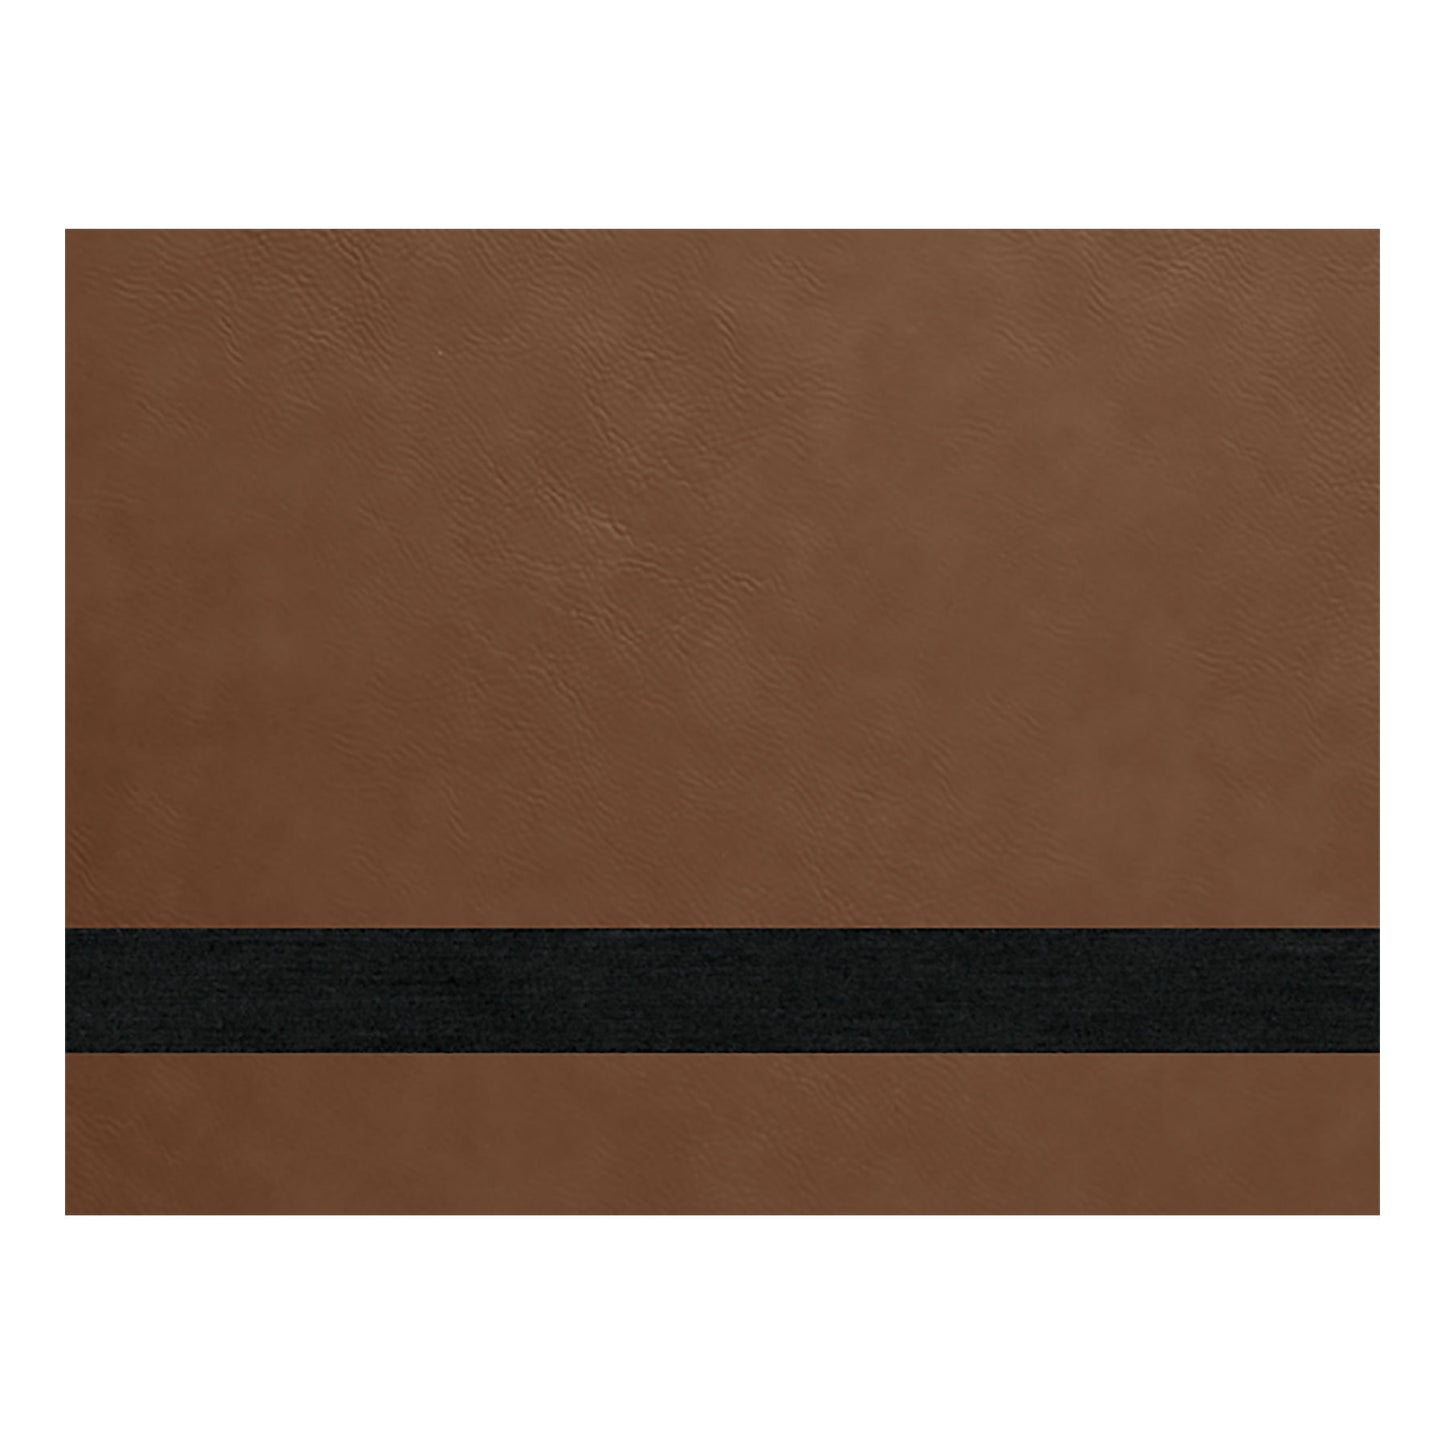 Leather Sheets for Laser Engraving, Laserable Leatherette 12 x 24